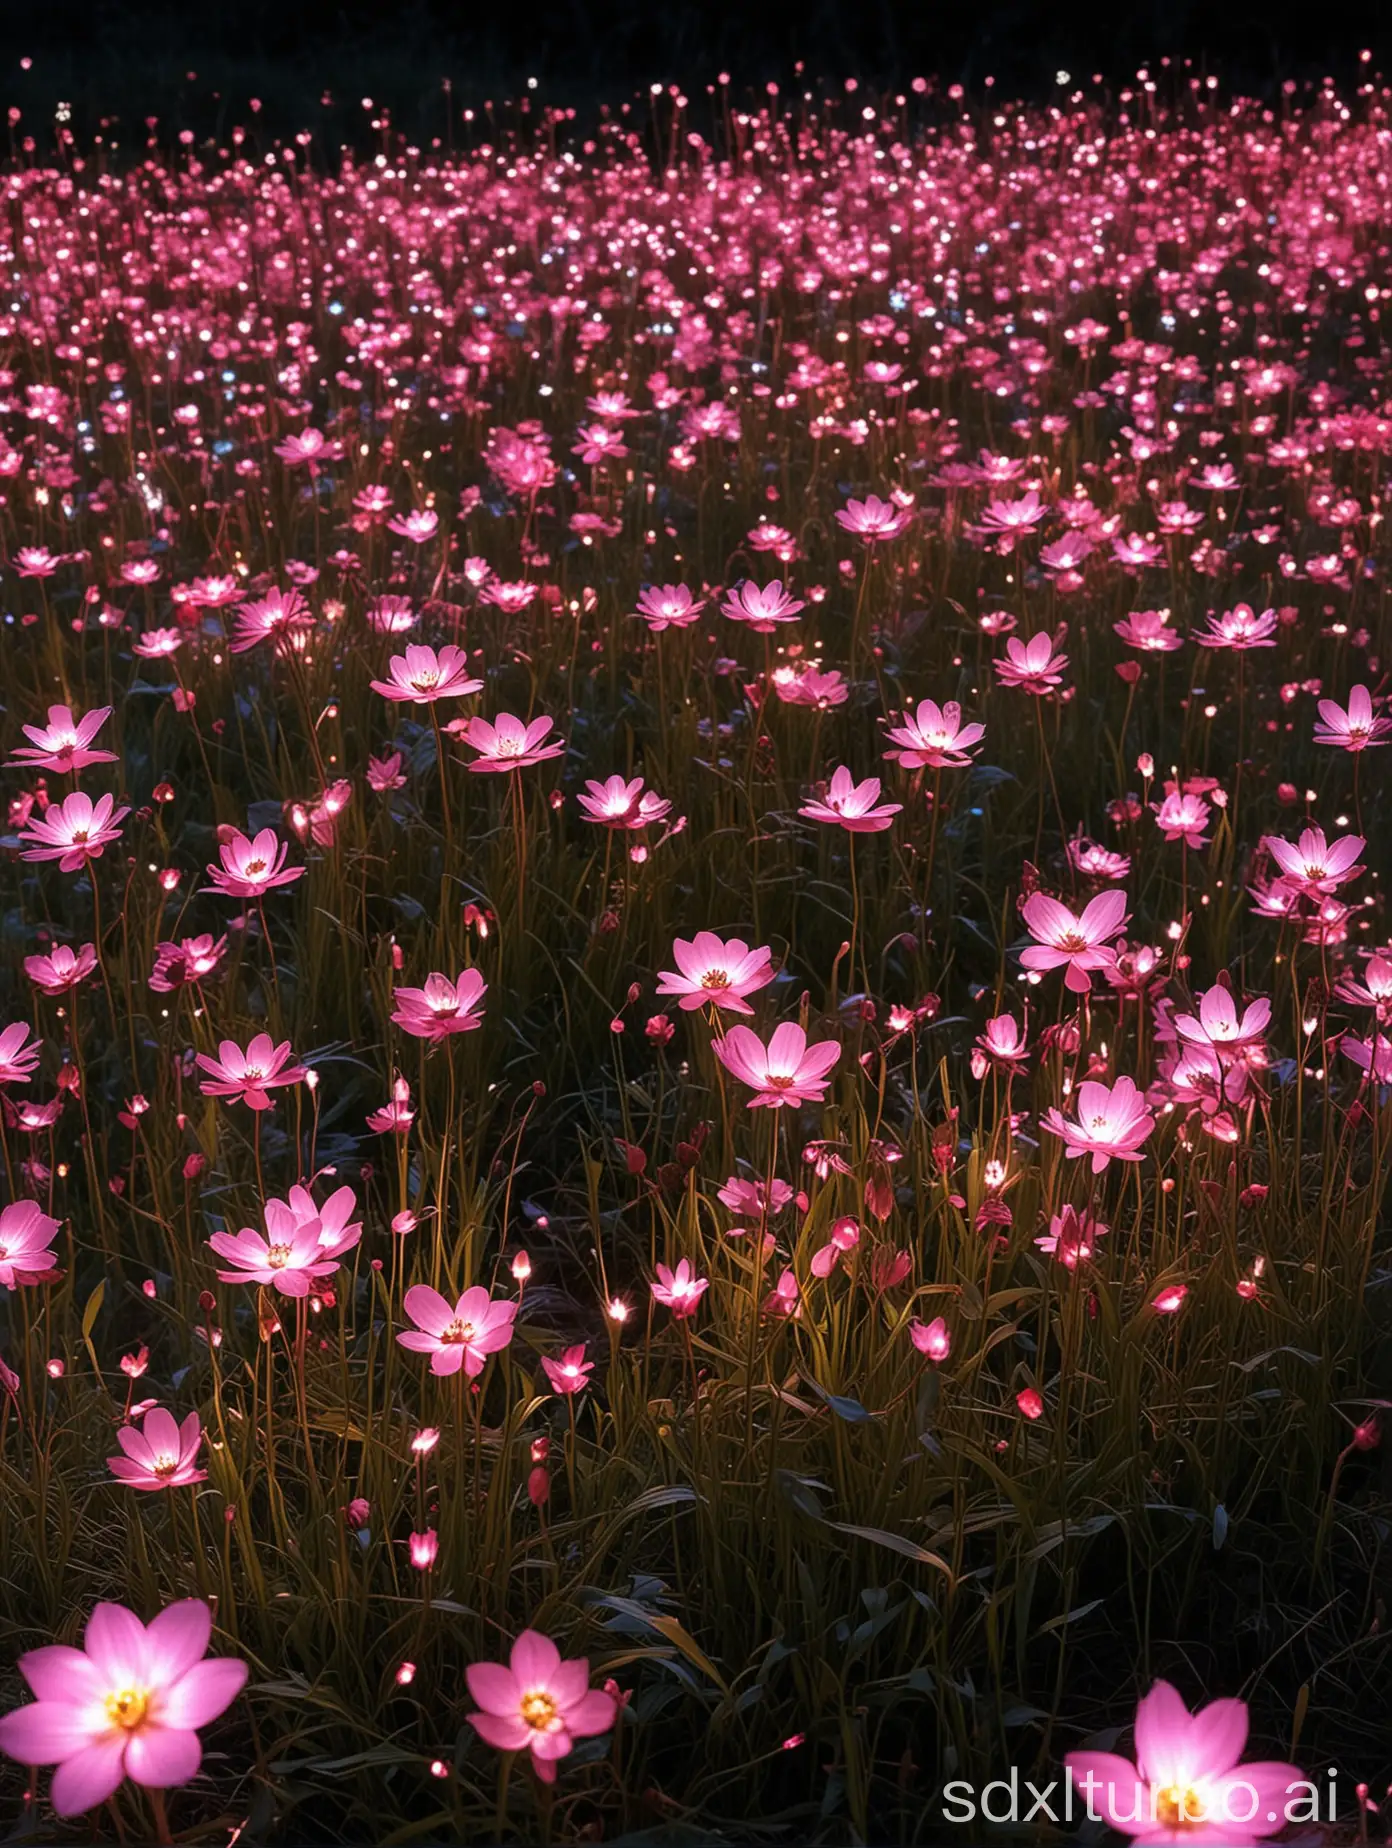 there are many pink flowers that are growing in the grass, digital art by Bruce Munro, tumblr, interactive art, glowing flowers, field of flowers at night, surreal waiizi flowers, luminous flowers, rose pink lighting, soft bloom lighting, beautiful lit, field of pink flowers, lights with bloom, scattered glowing pink fireflies, beautiful glowing lights, field of fantasy flowers